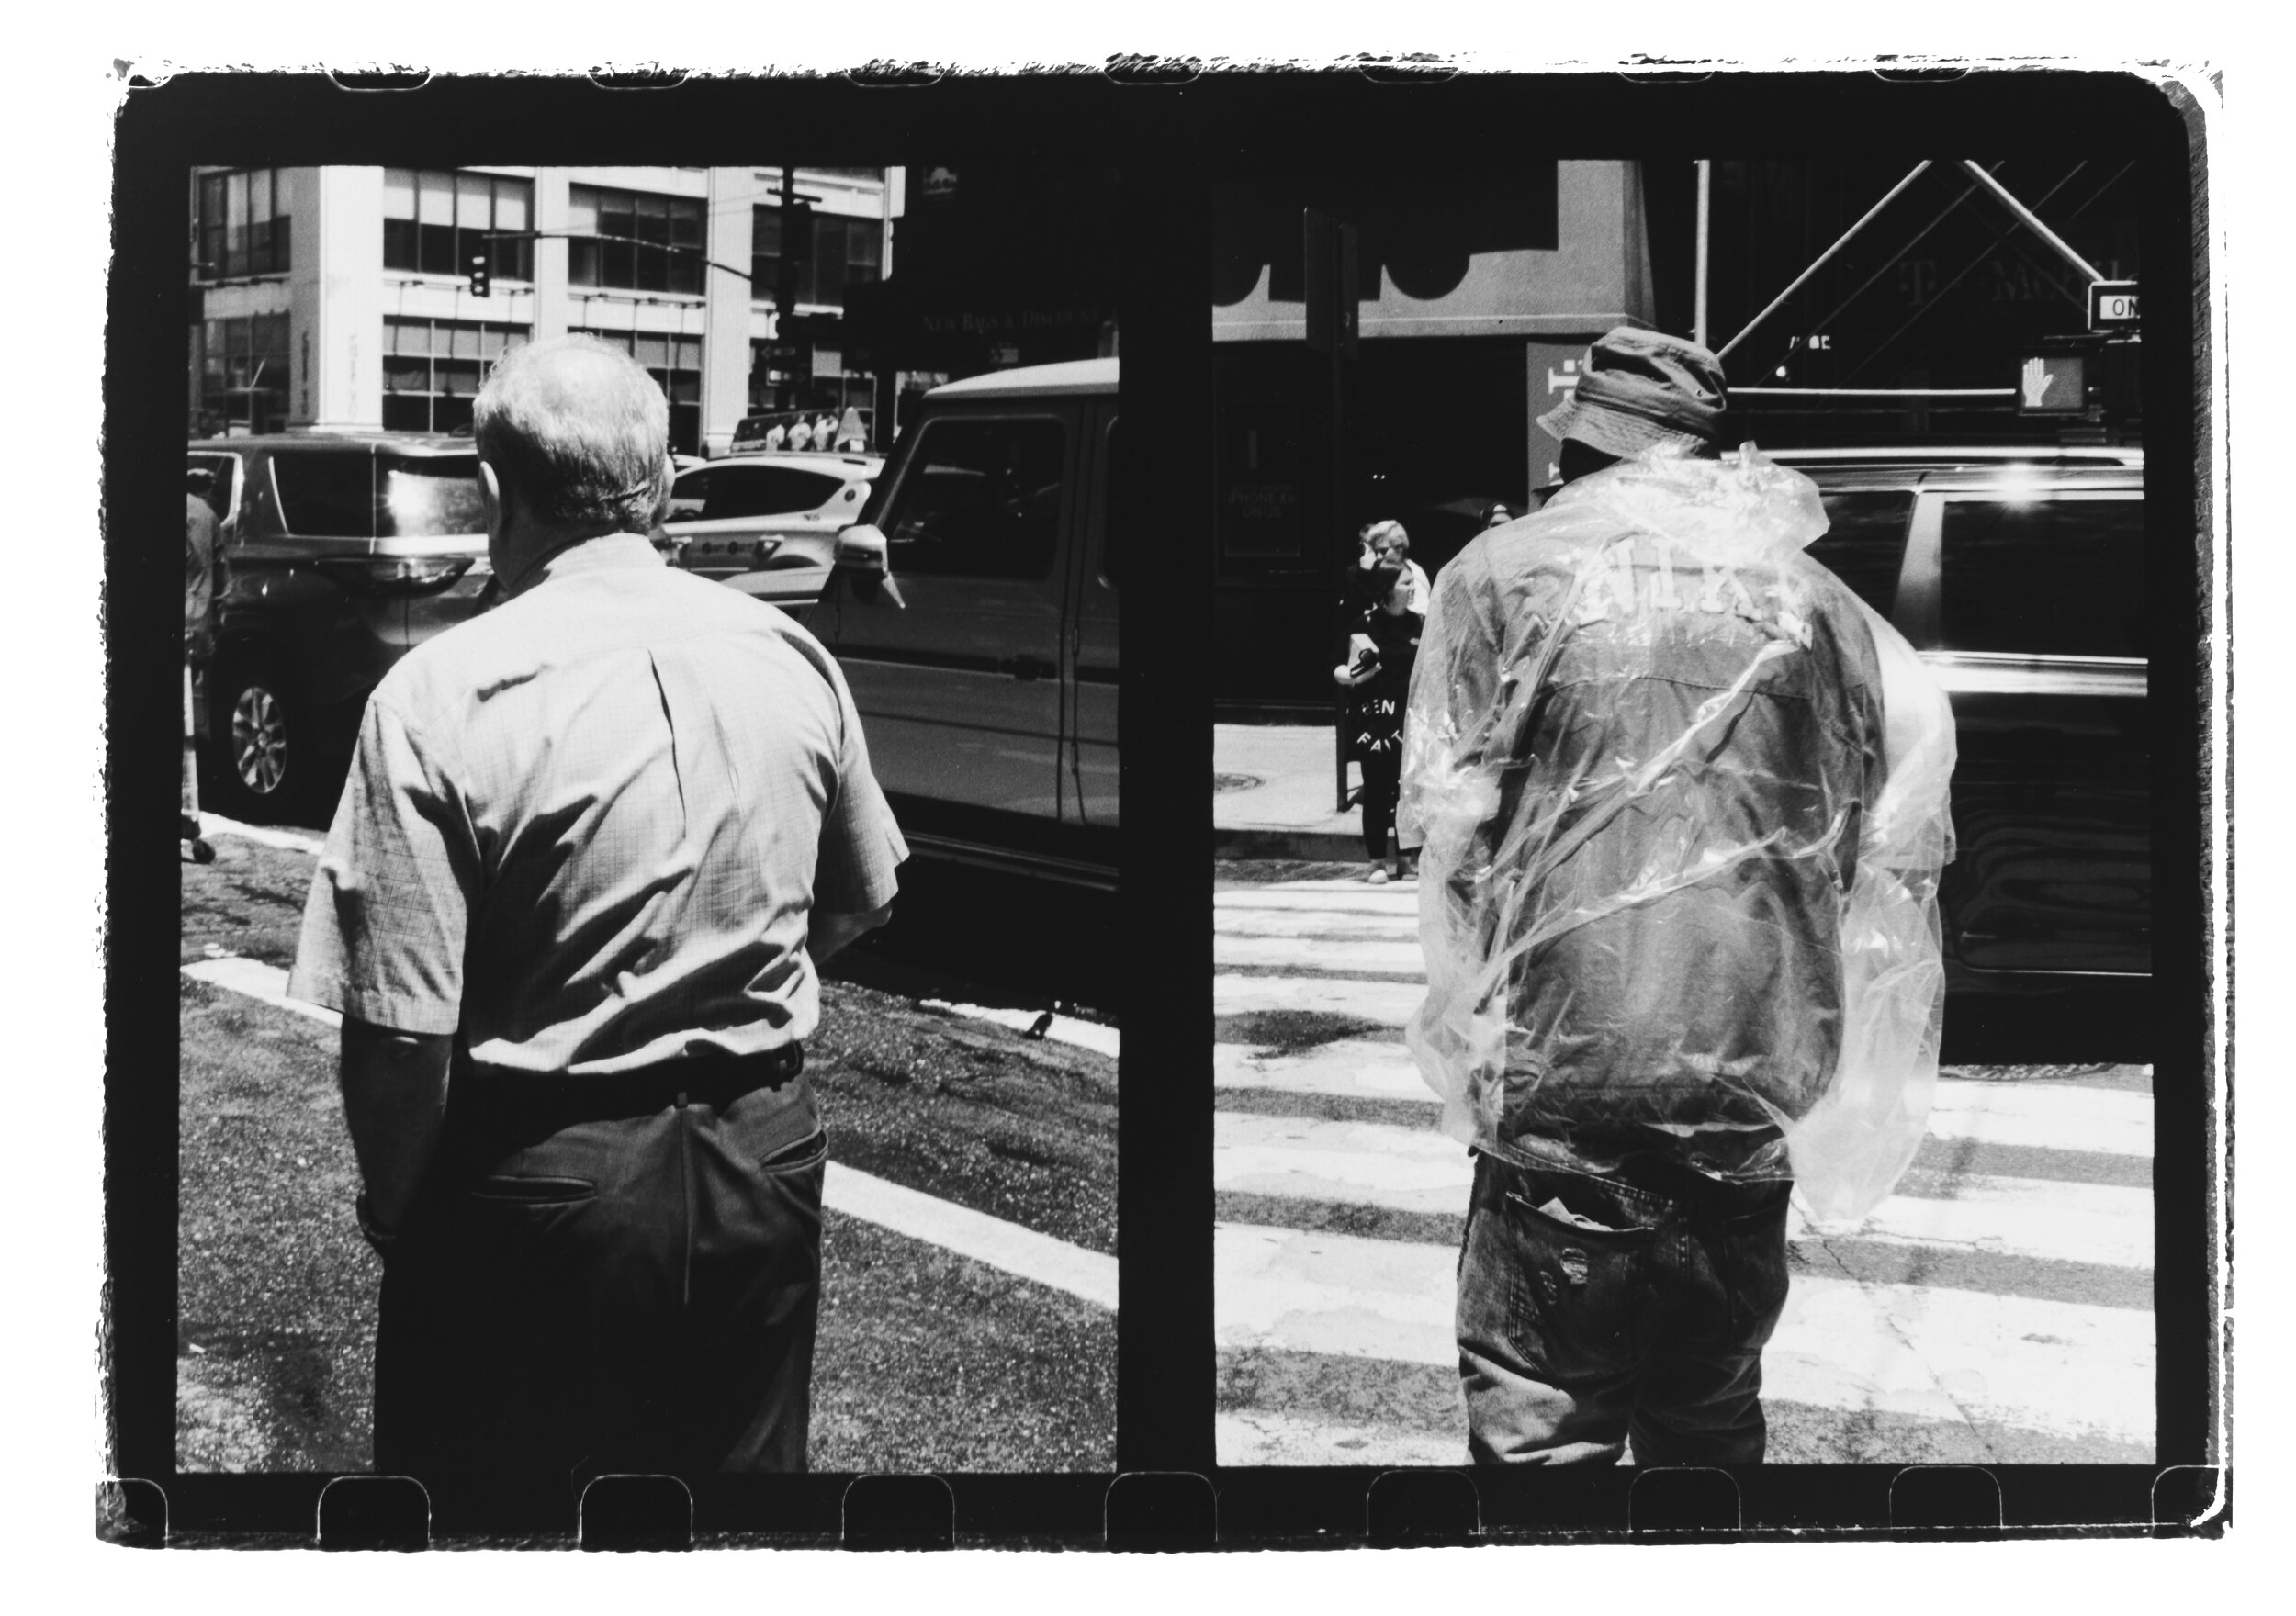  Nolan Warner - Sullivan   Untitled (Diptych #73) , 2020  From the series: … And Now We Are Walking Down The Street  Silver Gelatin Print    